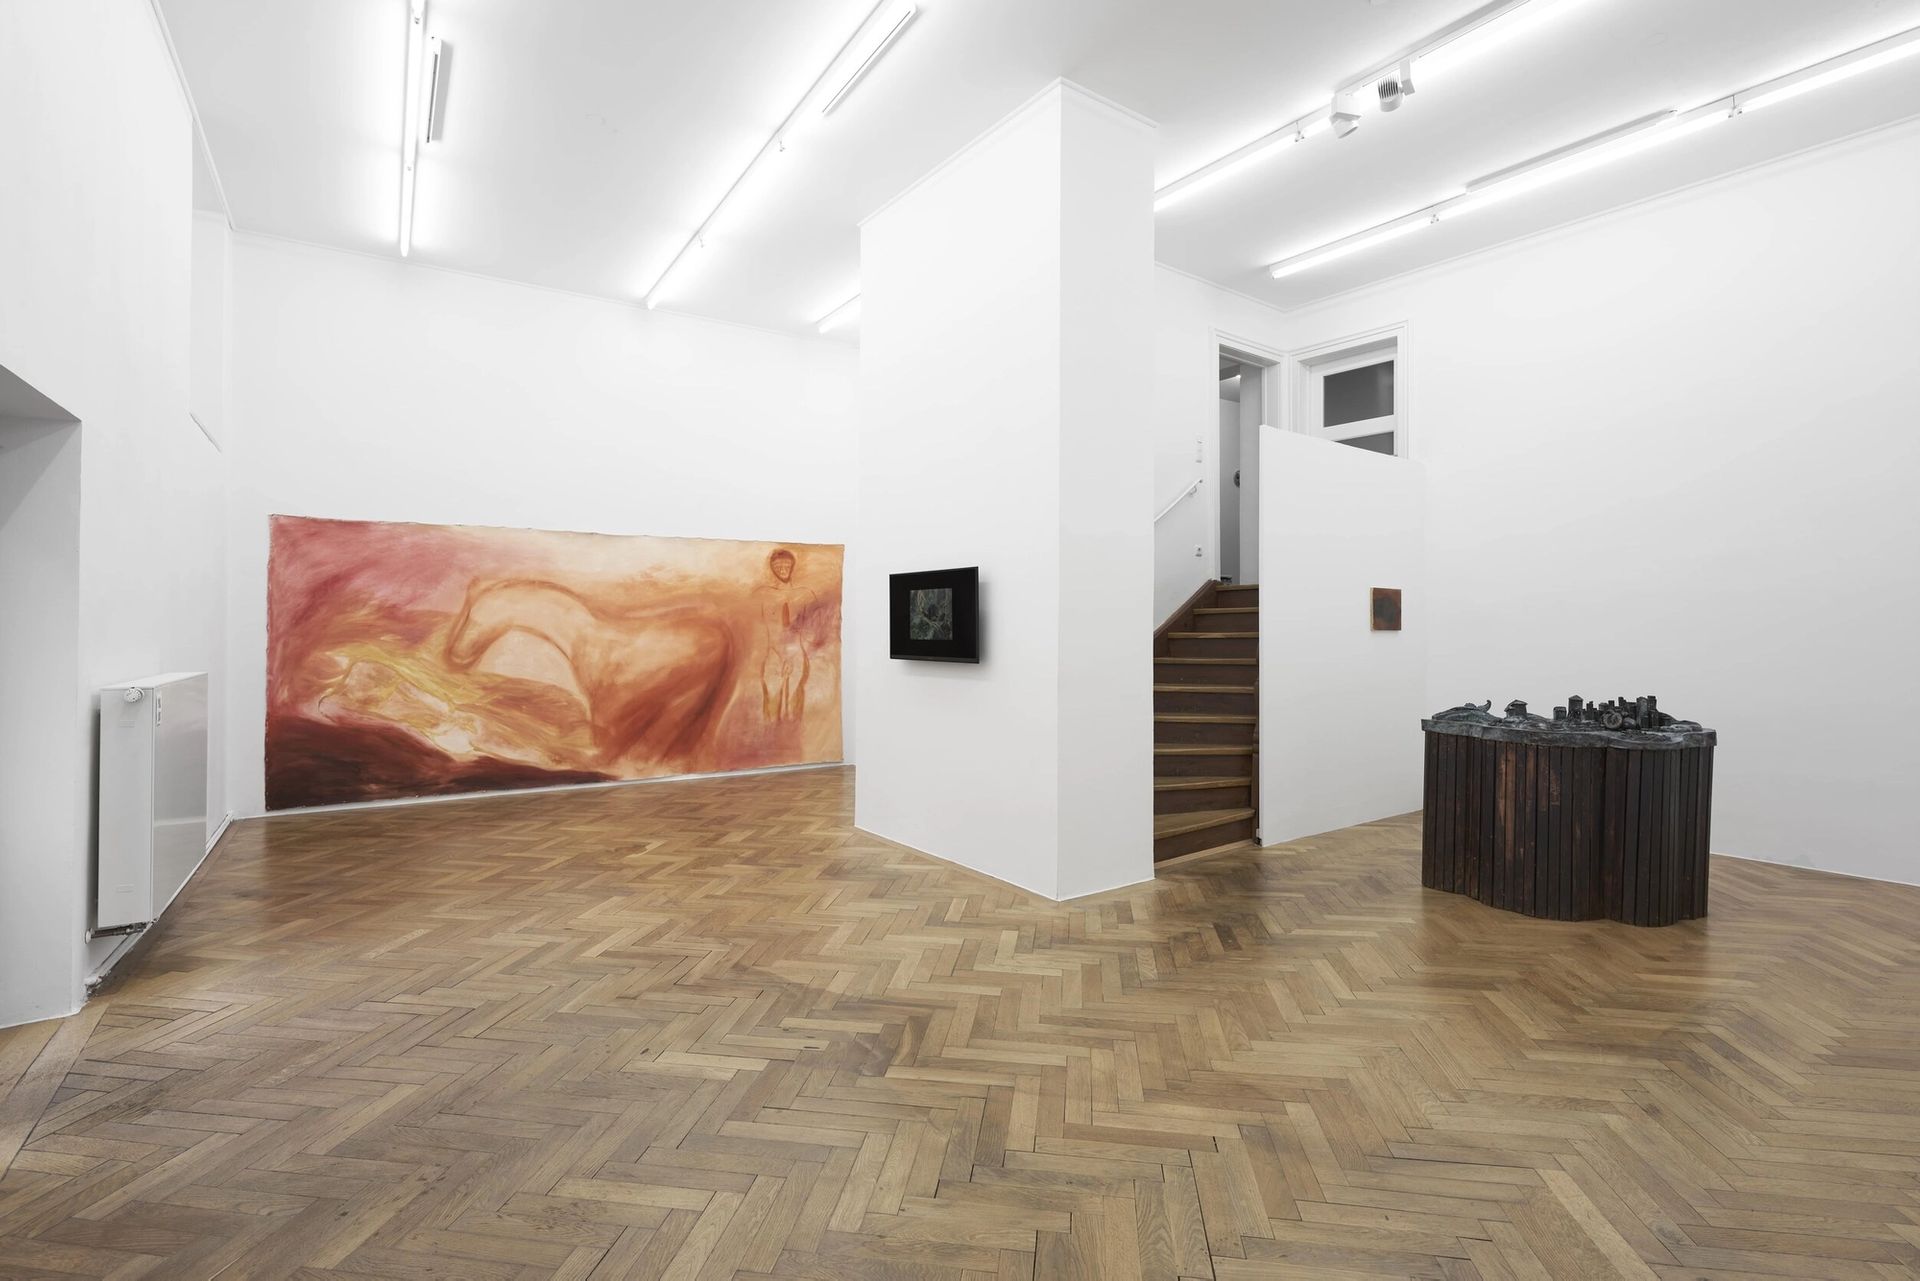 Installation view: „Various Others 2020“, Lena Henke, Dominique Knowles, Megan Francis Sullivan in cooperation with Galerie Emanuel Layr, photo: Ulrich Gebert